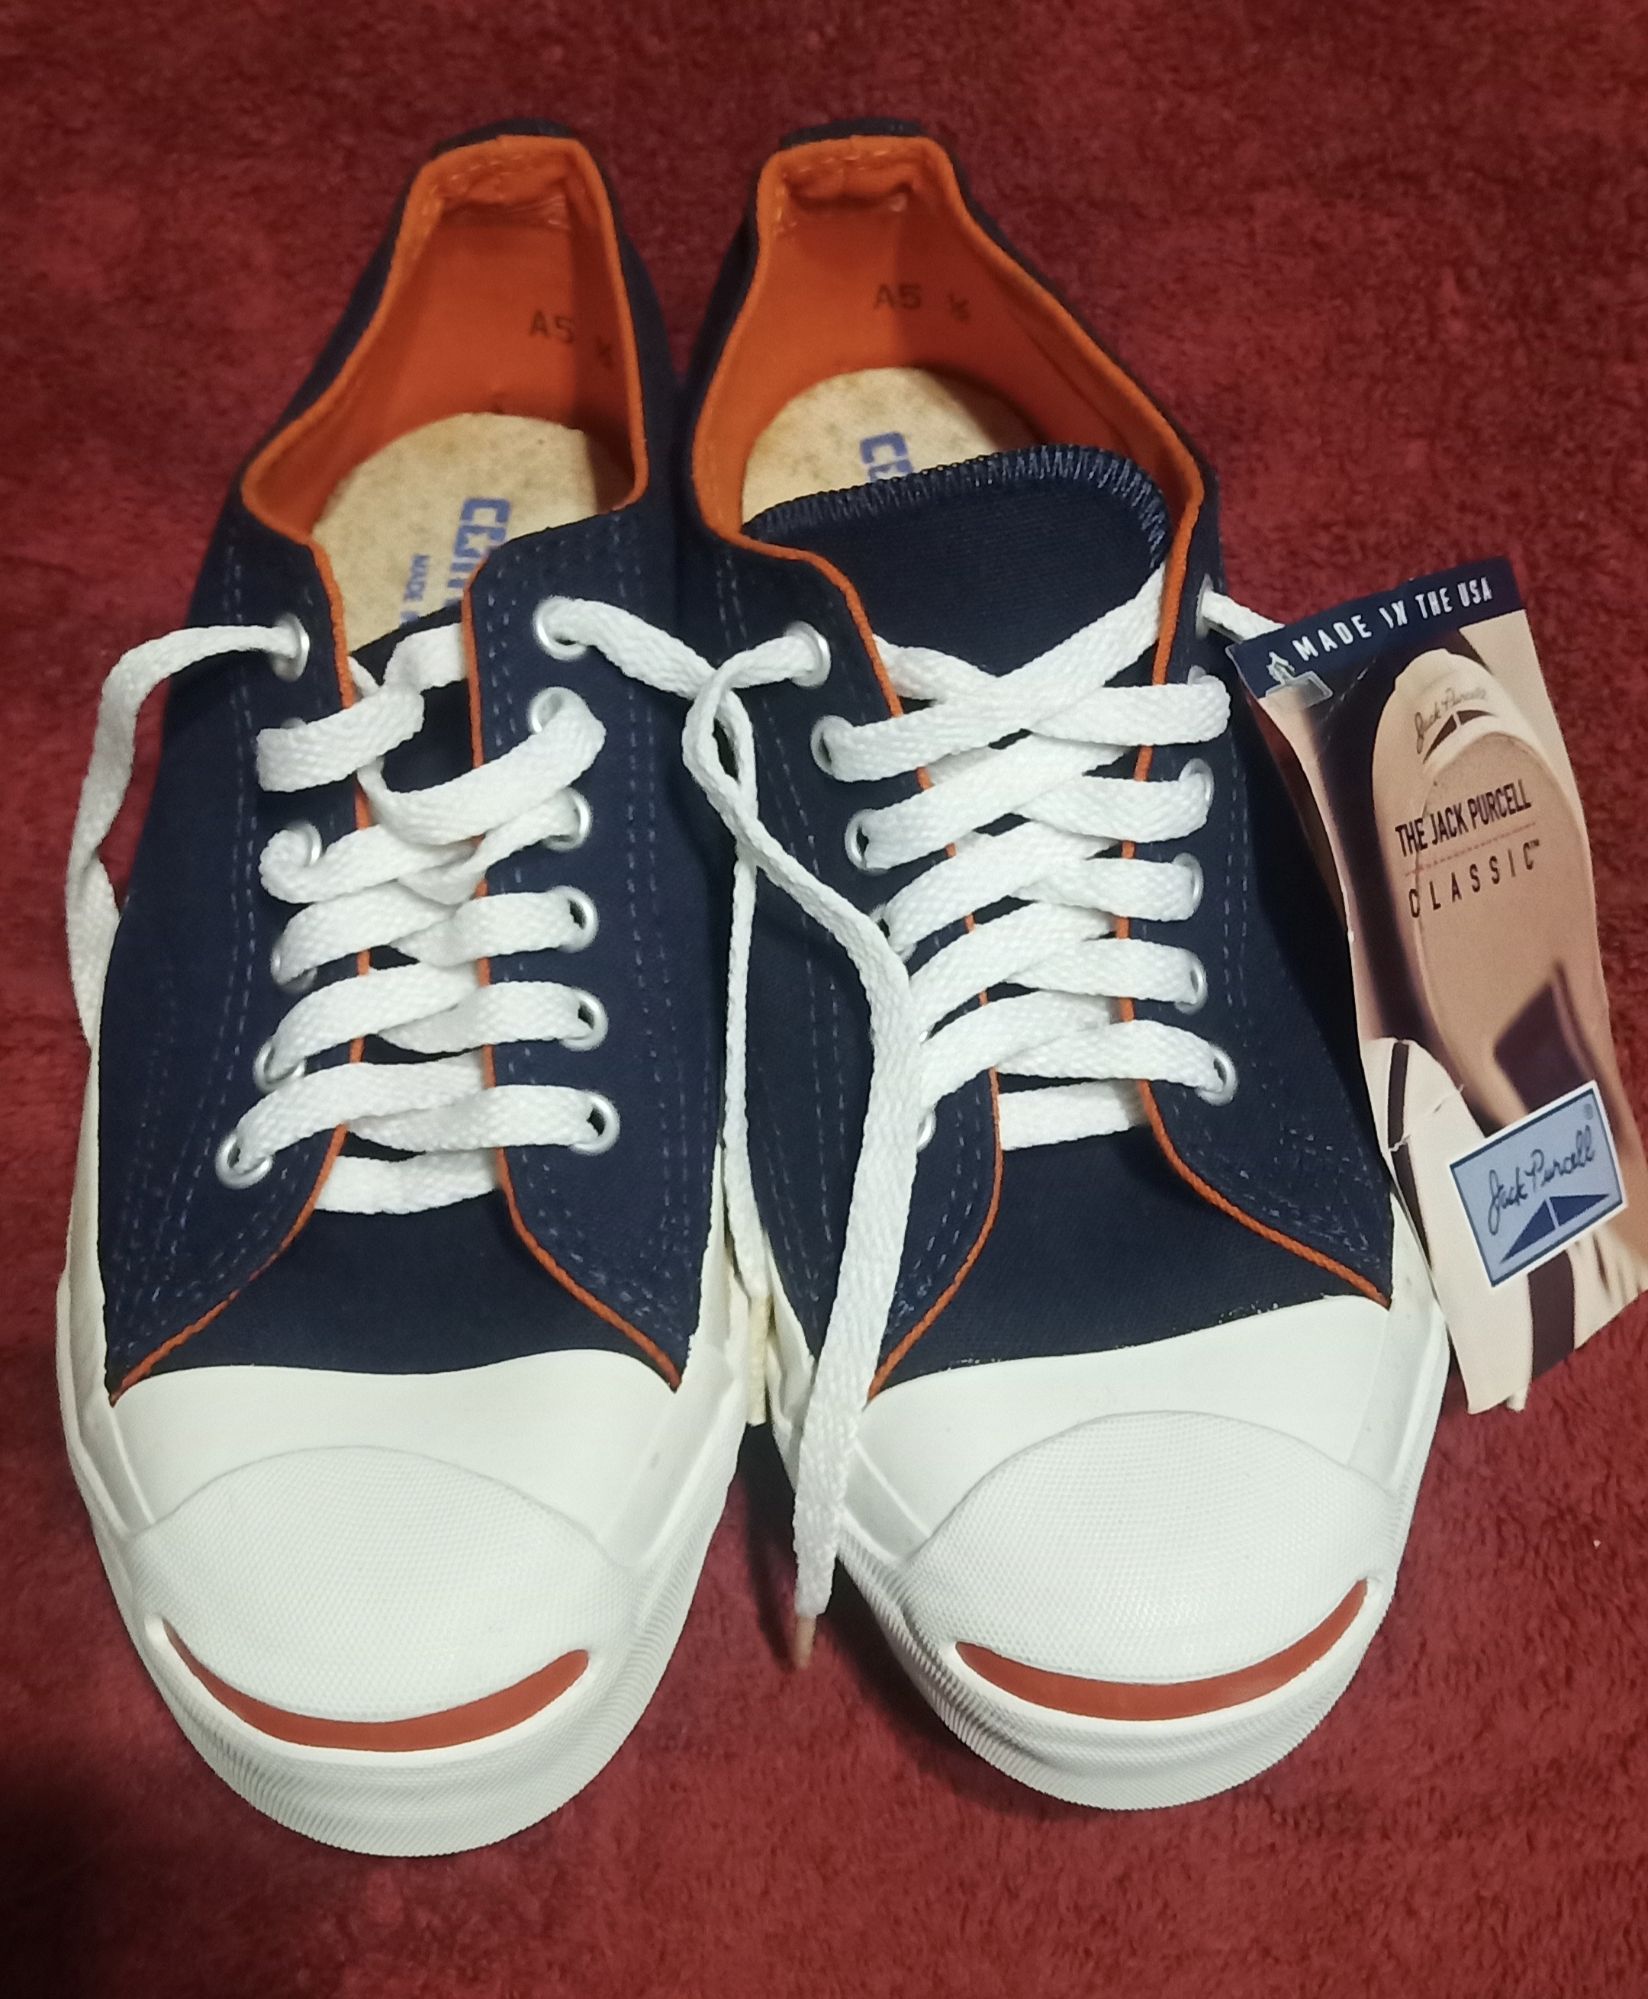 Converse Jack Purcell Dead stock มือ 1 made in usa size 5.5 Navy Sun ...